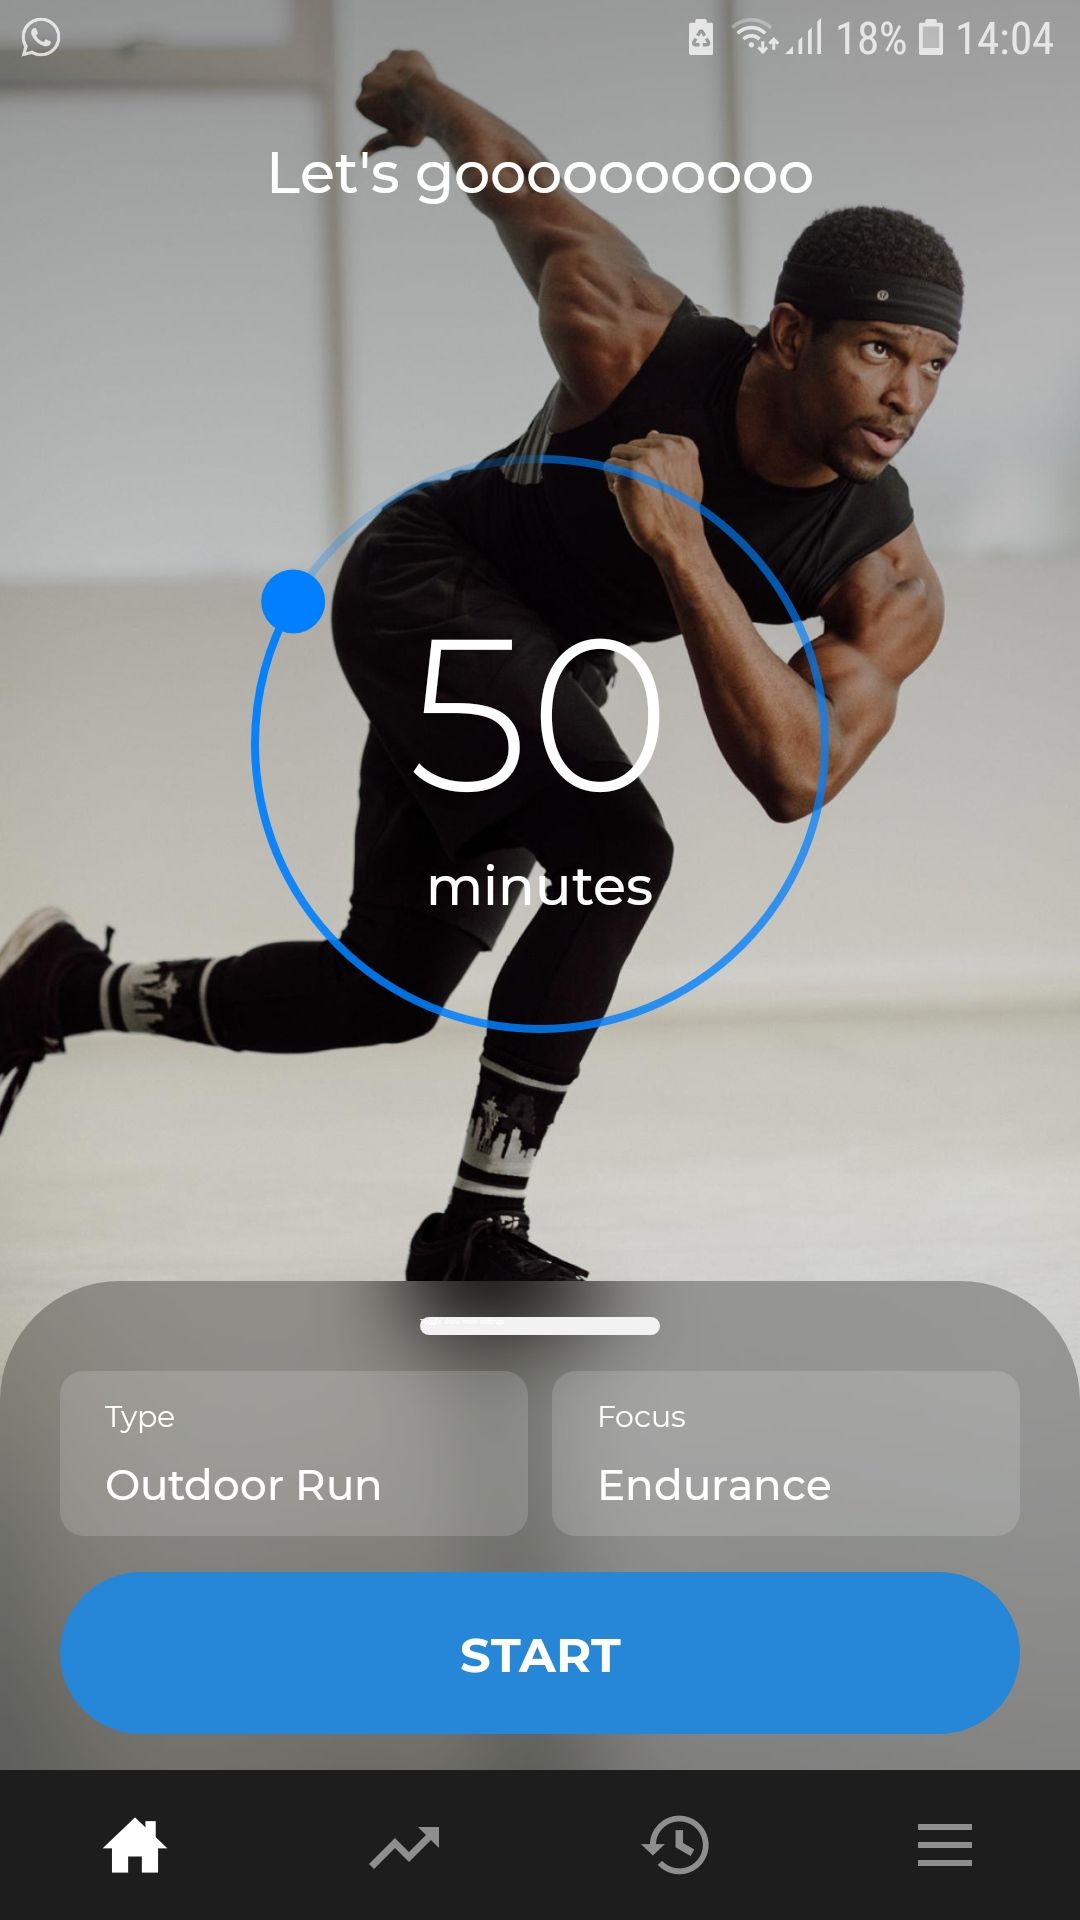 Down Dog Running mobile workout app